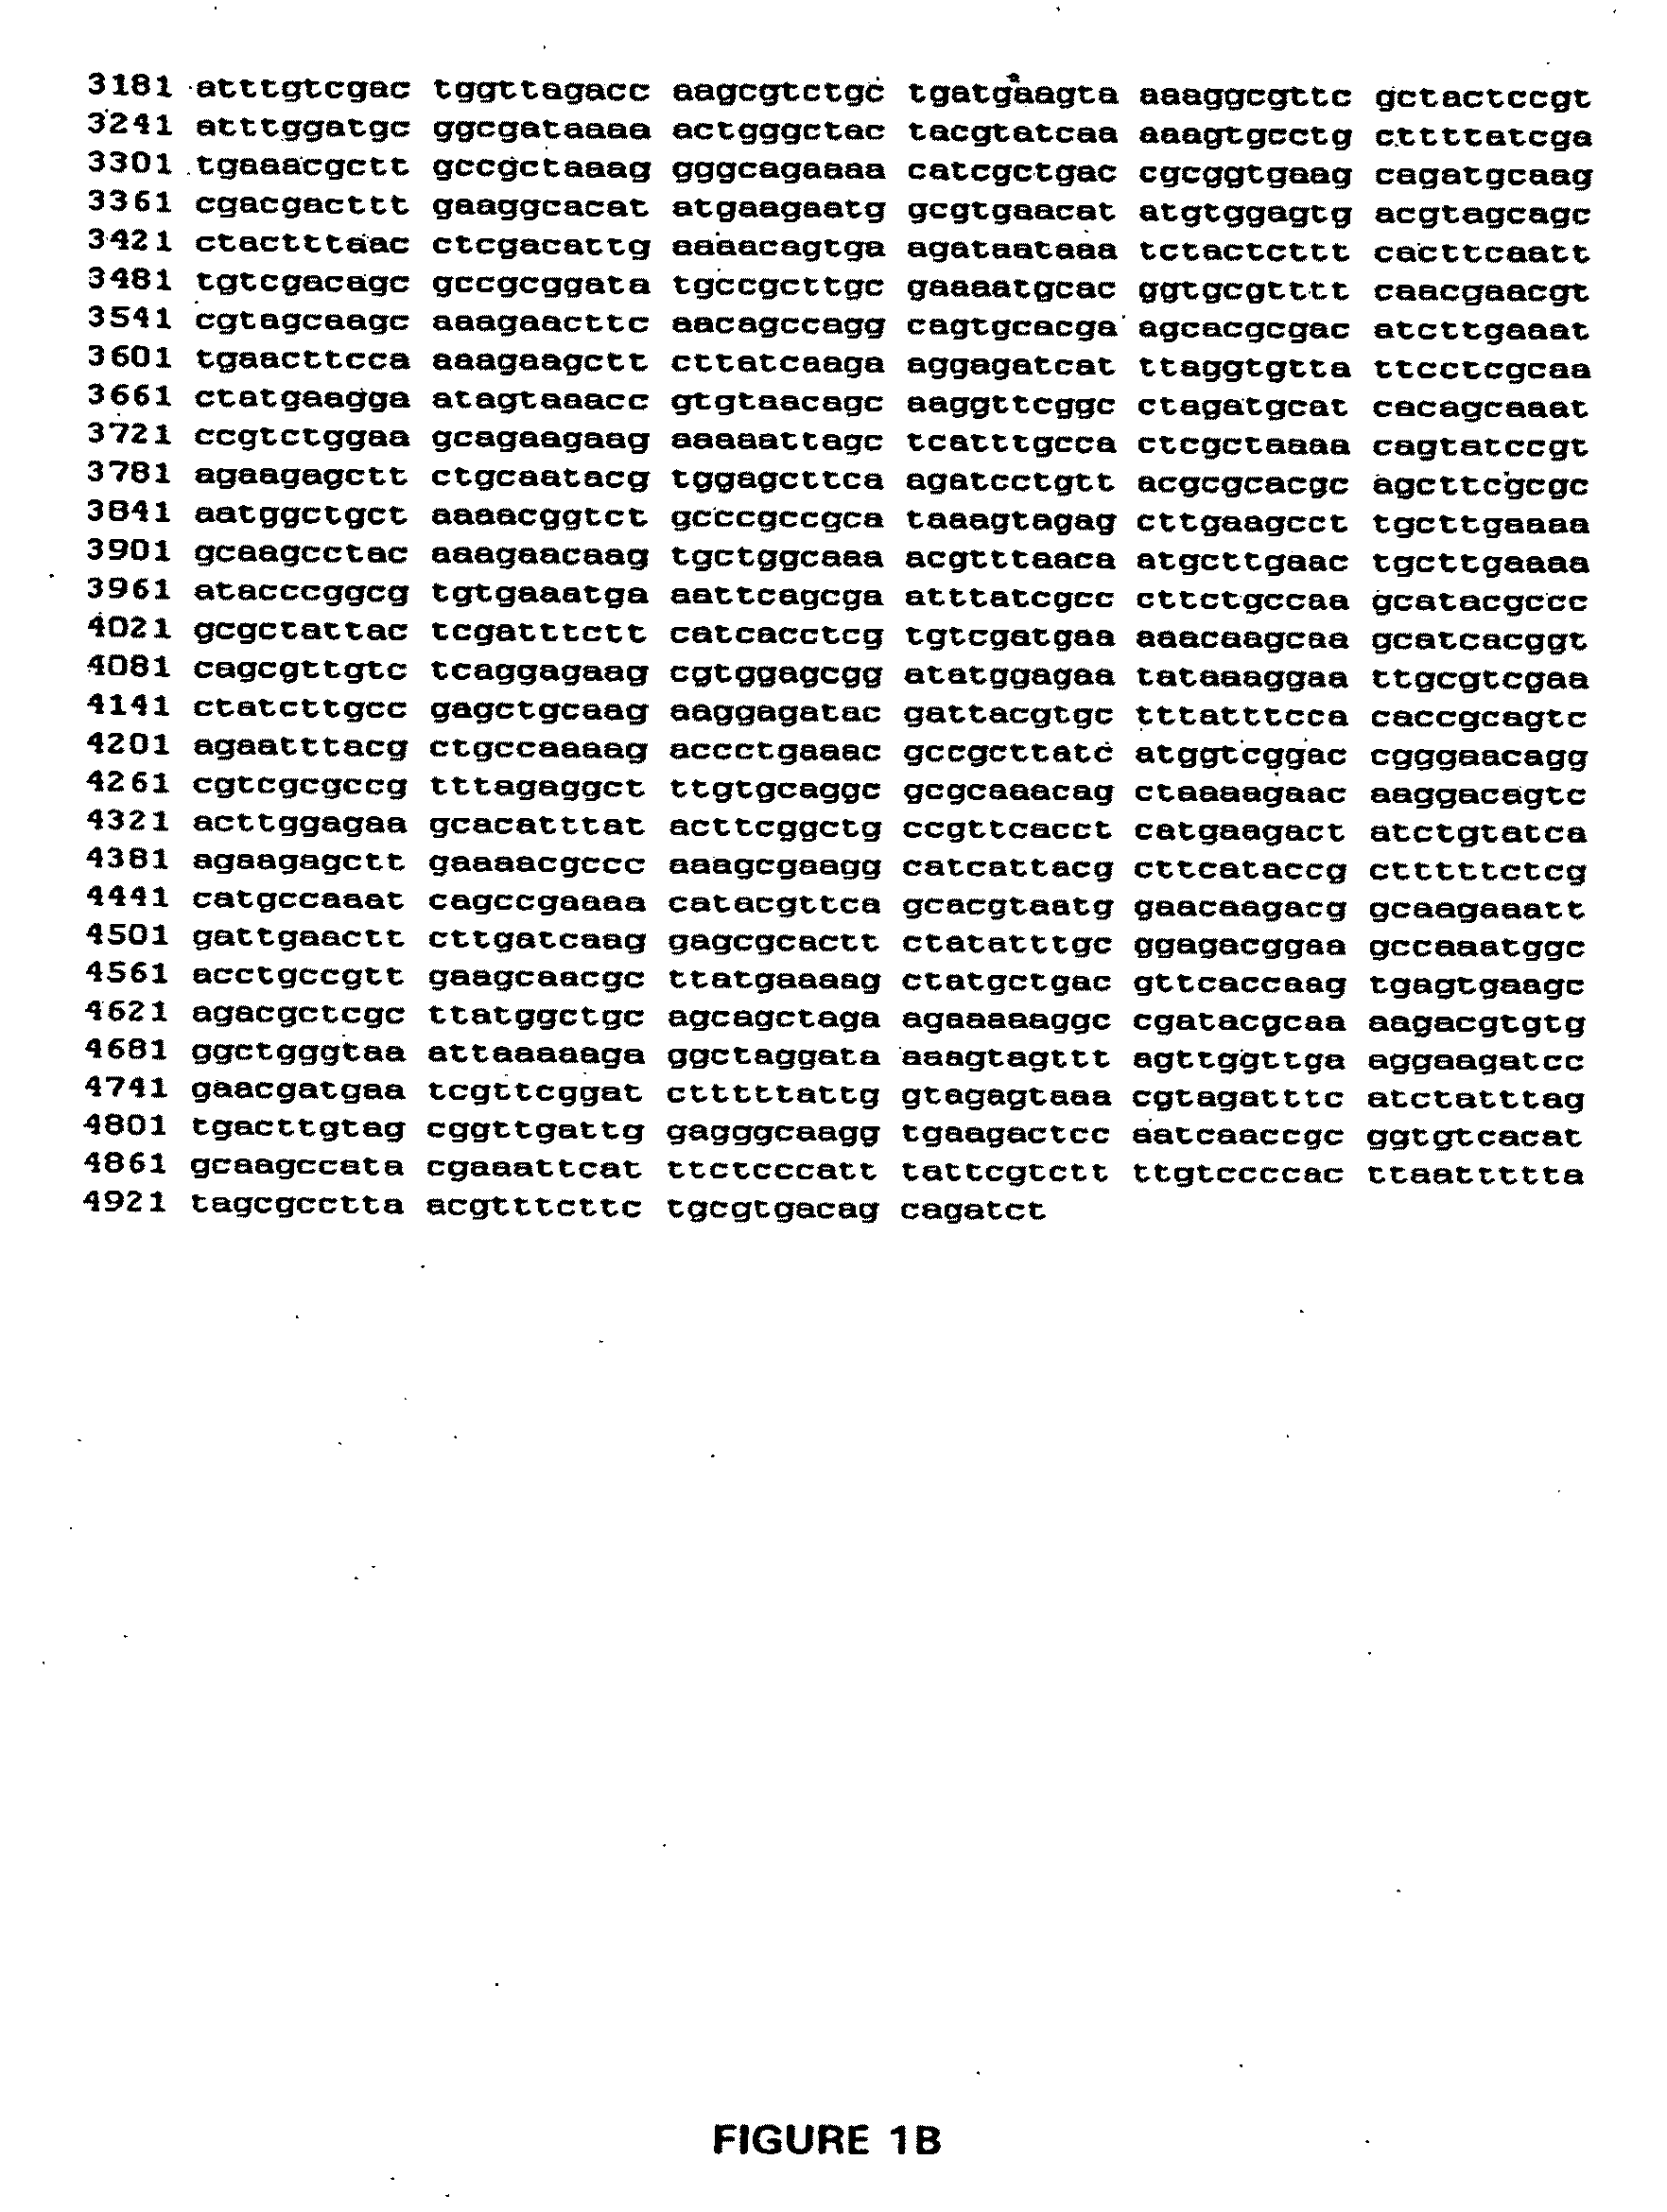 Thermostable peroxide-driven cytochrome P450 oxygenase variants and methods of use